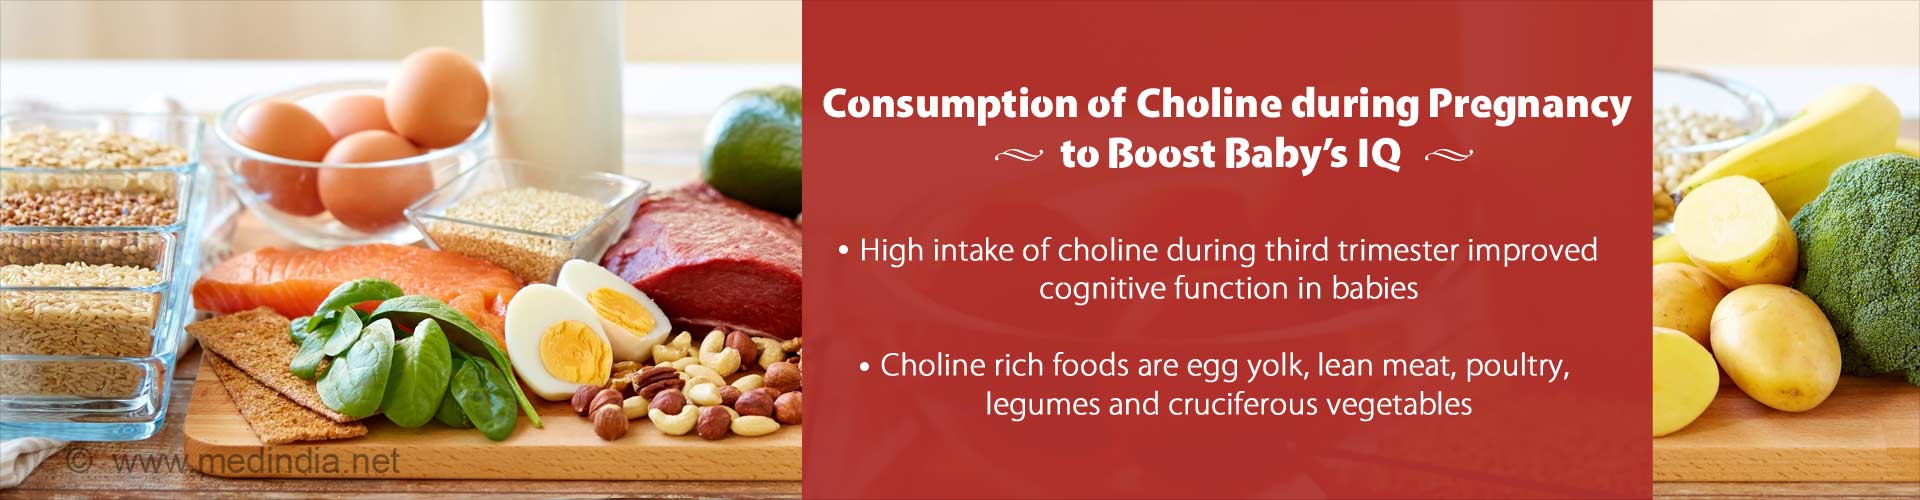 Consumption of choline during pregnancy to boost babies IQ
- High intake of choline during third trimester improved cognitive function in babies
- choline rich foods are egg yolk, lean meat, poultry, legumes and cruciferous vegetables
